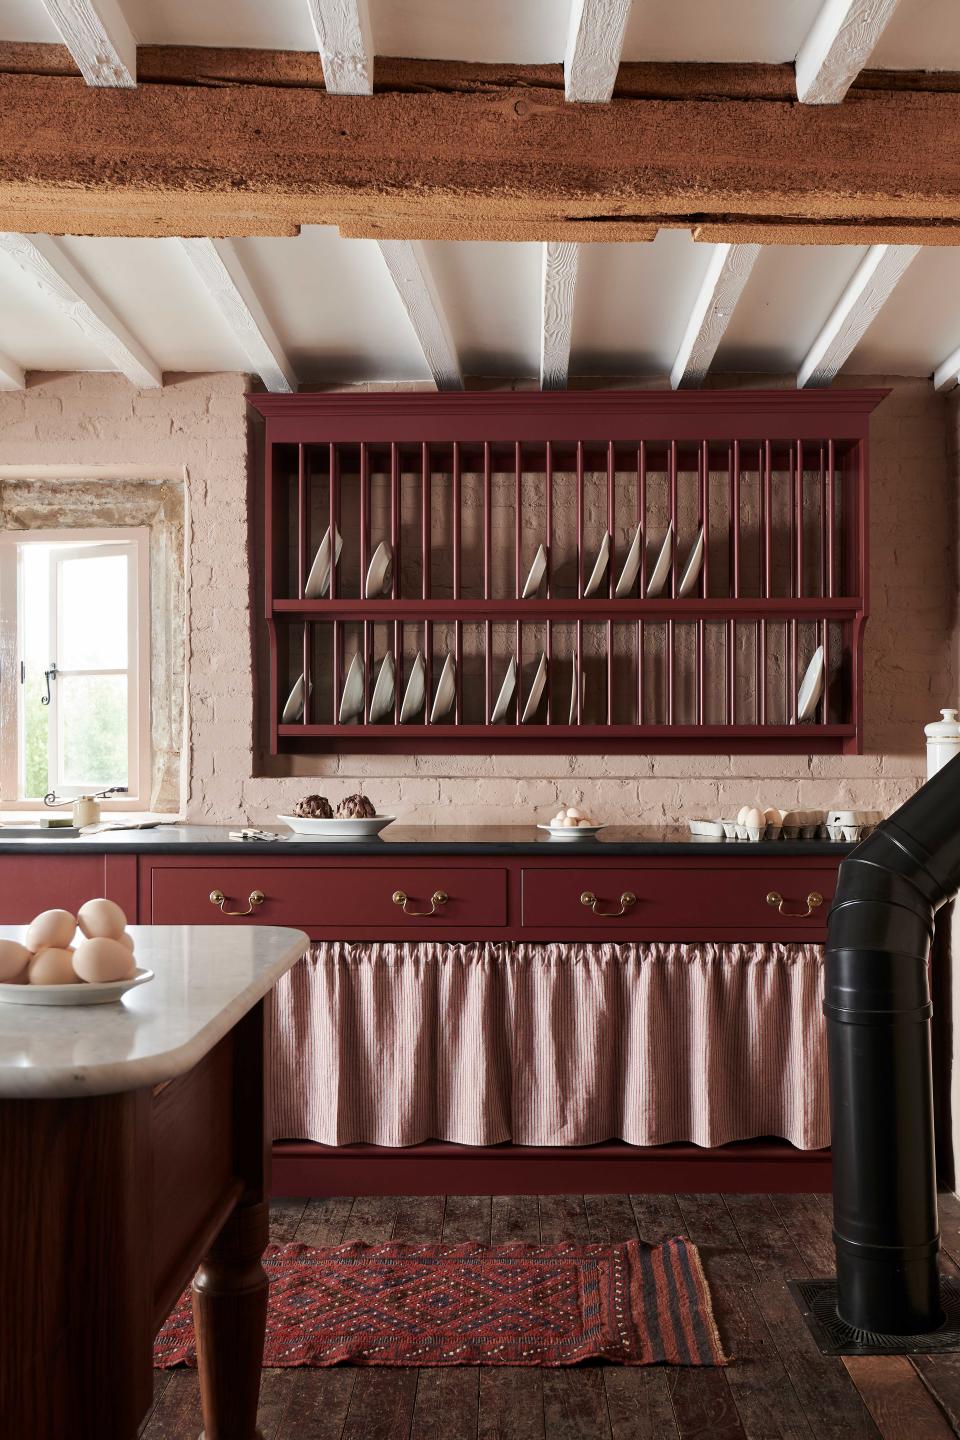 <p> If you are looking to create a&#xA0;rustic kitchen ideas&#xA0;that are created from freestanding furniture from disparate sources and even periods, you can conjure up a cohesive, more uniform look with the clever use of paint. Here,&#xA0;freestanding kitchen&#xA0;cabinets and a plate rack have simply but cleverly been visually linked with&#xA0;kitchen colour ideas&#xA0;to match. </p> <p> &apos;You needn&apos;t pick exactly the same color for different pieces of painted furniture,&apos; says&#xA0;<em>Homes &amp; Gardens</em>&apos; Editor in Chief Lucy Searle. &apos;Simply choosing differing tones of the same color can create a more layered look. If you are applying this technique to a kitchen, it is always more space-enhancing to put the darker tone on the base units, and the lighter shade on the wall cabinets.&apos; </p>